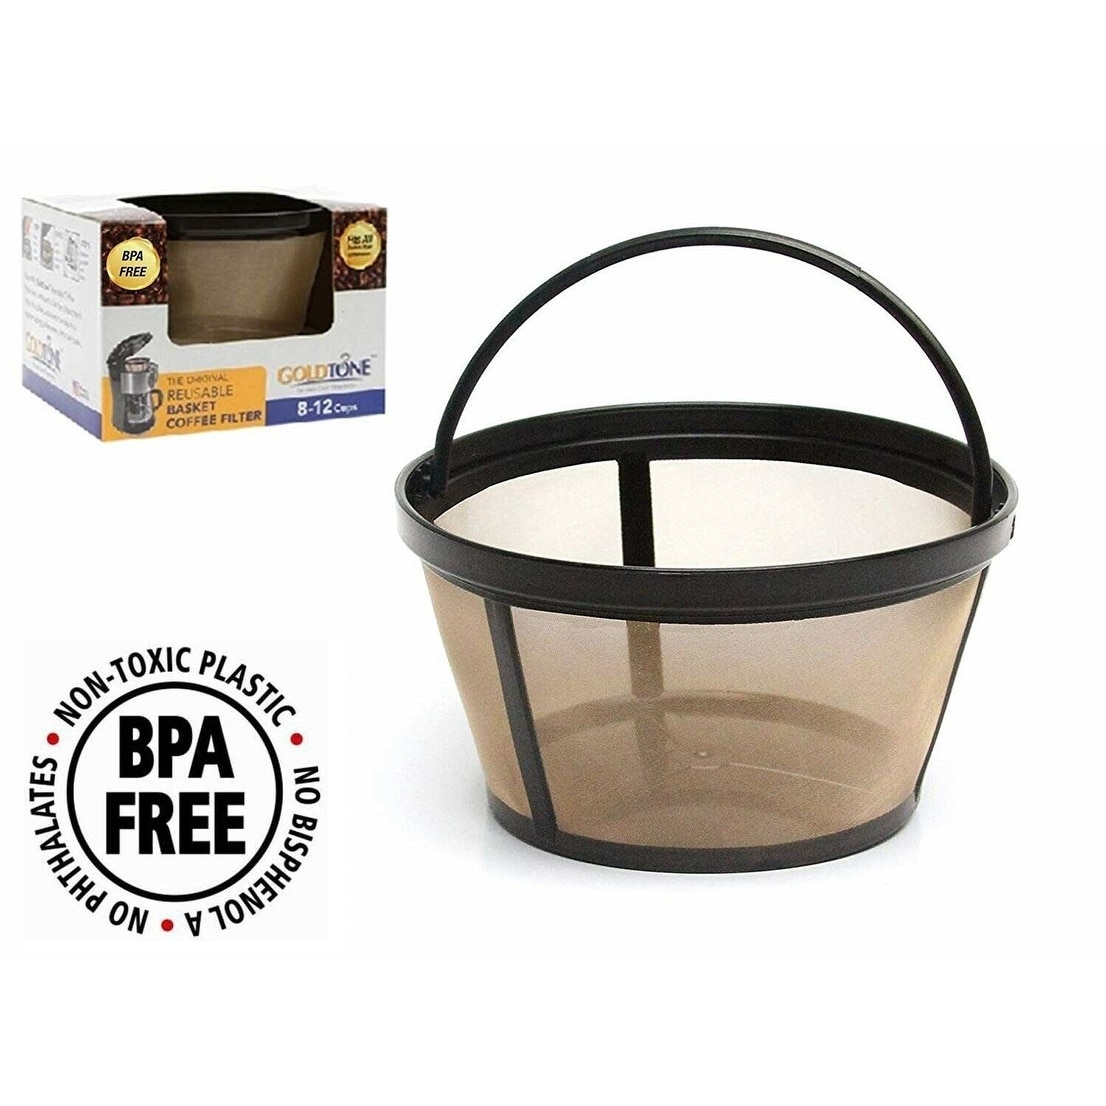  GOLDTONE Reusable 8-12 Cup Basket Coffee Filter fits Hamilton  Beach Coffee Makers and Brewers. Replaces your Hamilton Beach Reusable  Coffee Filter - BPA Free: Home & Kitchen